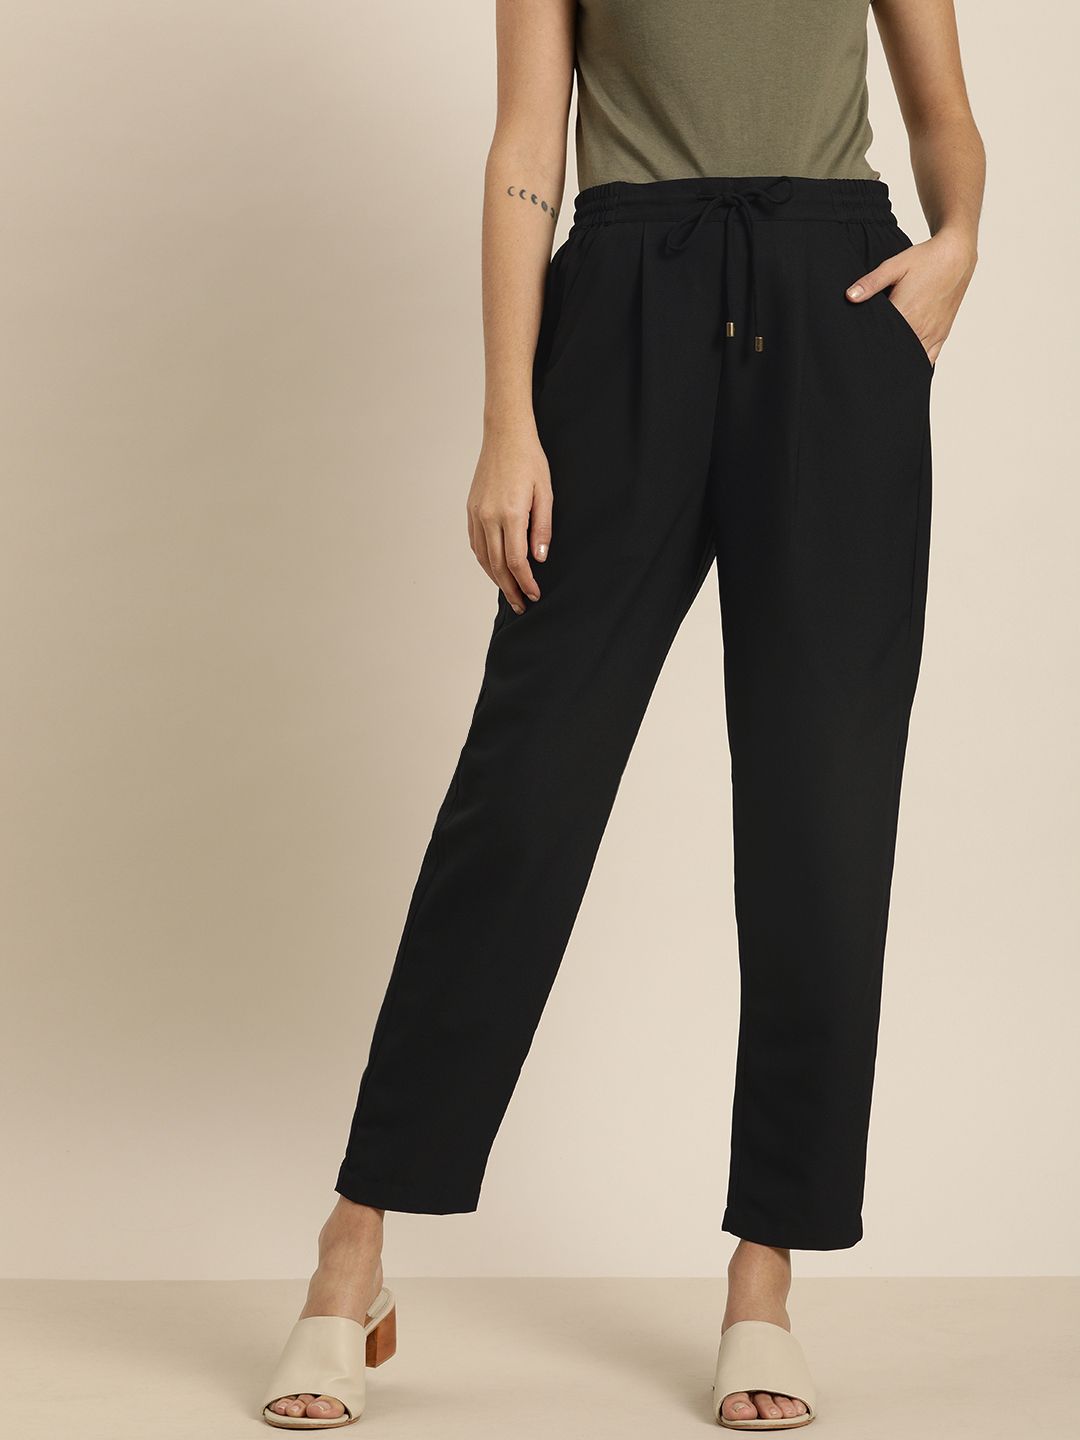 all about you Women Black Slim Fit Solid Trousers Price in India